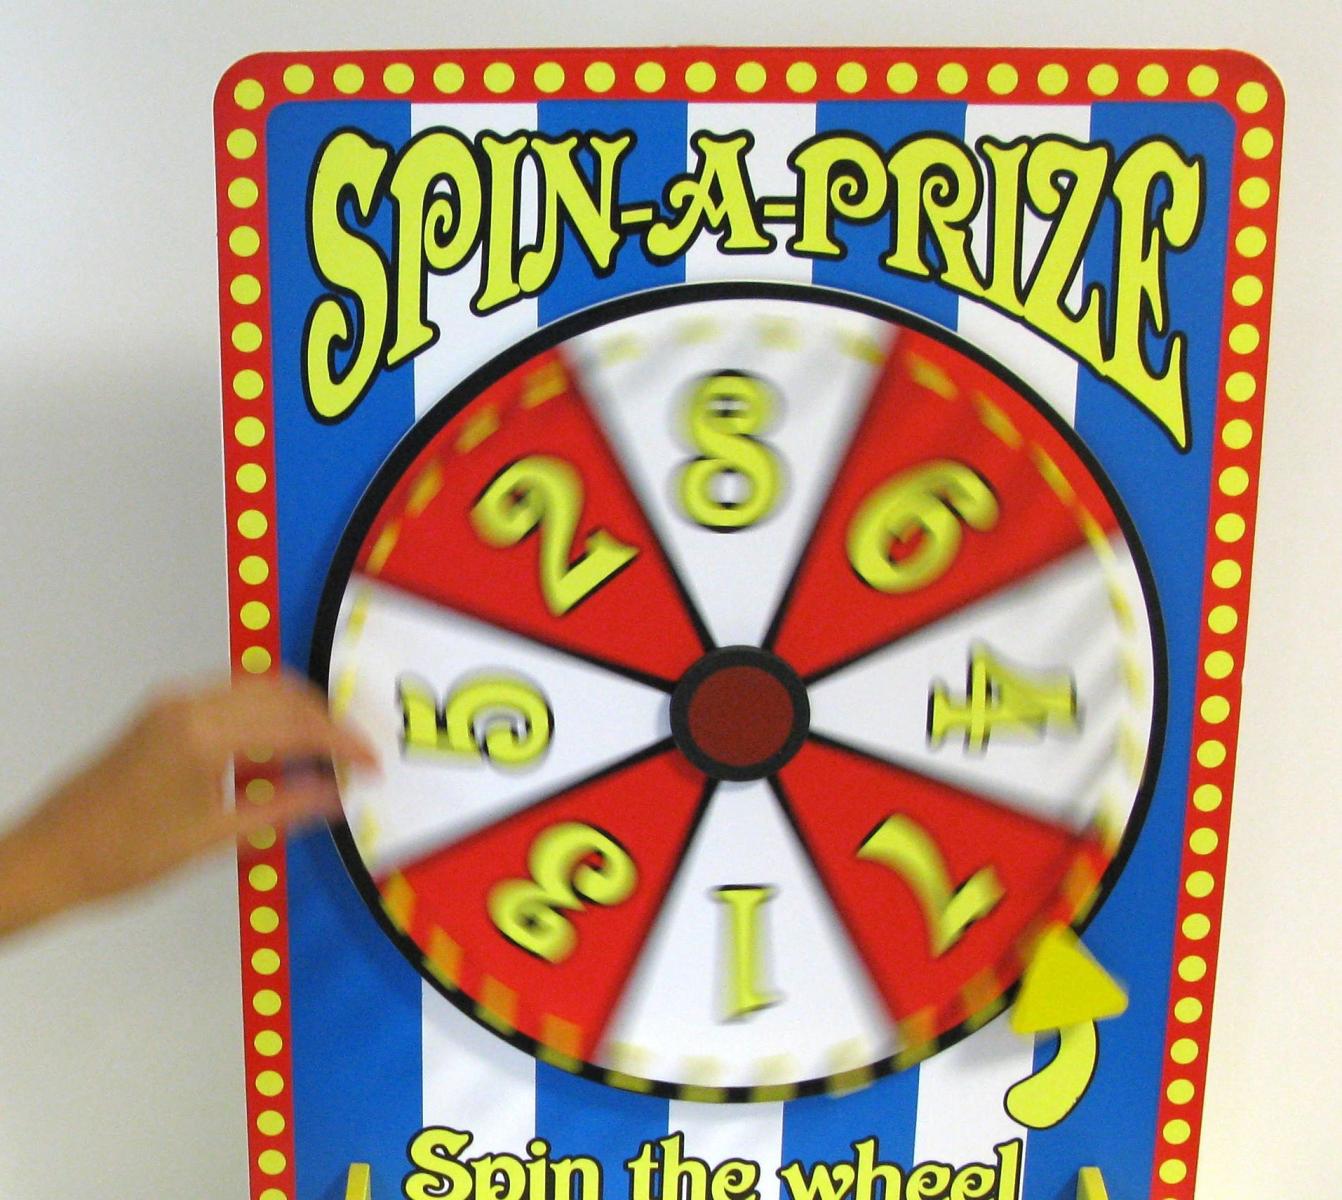 Prize wheel from the activity